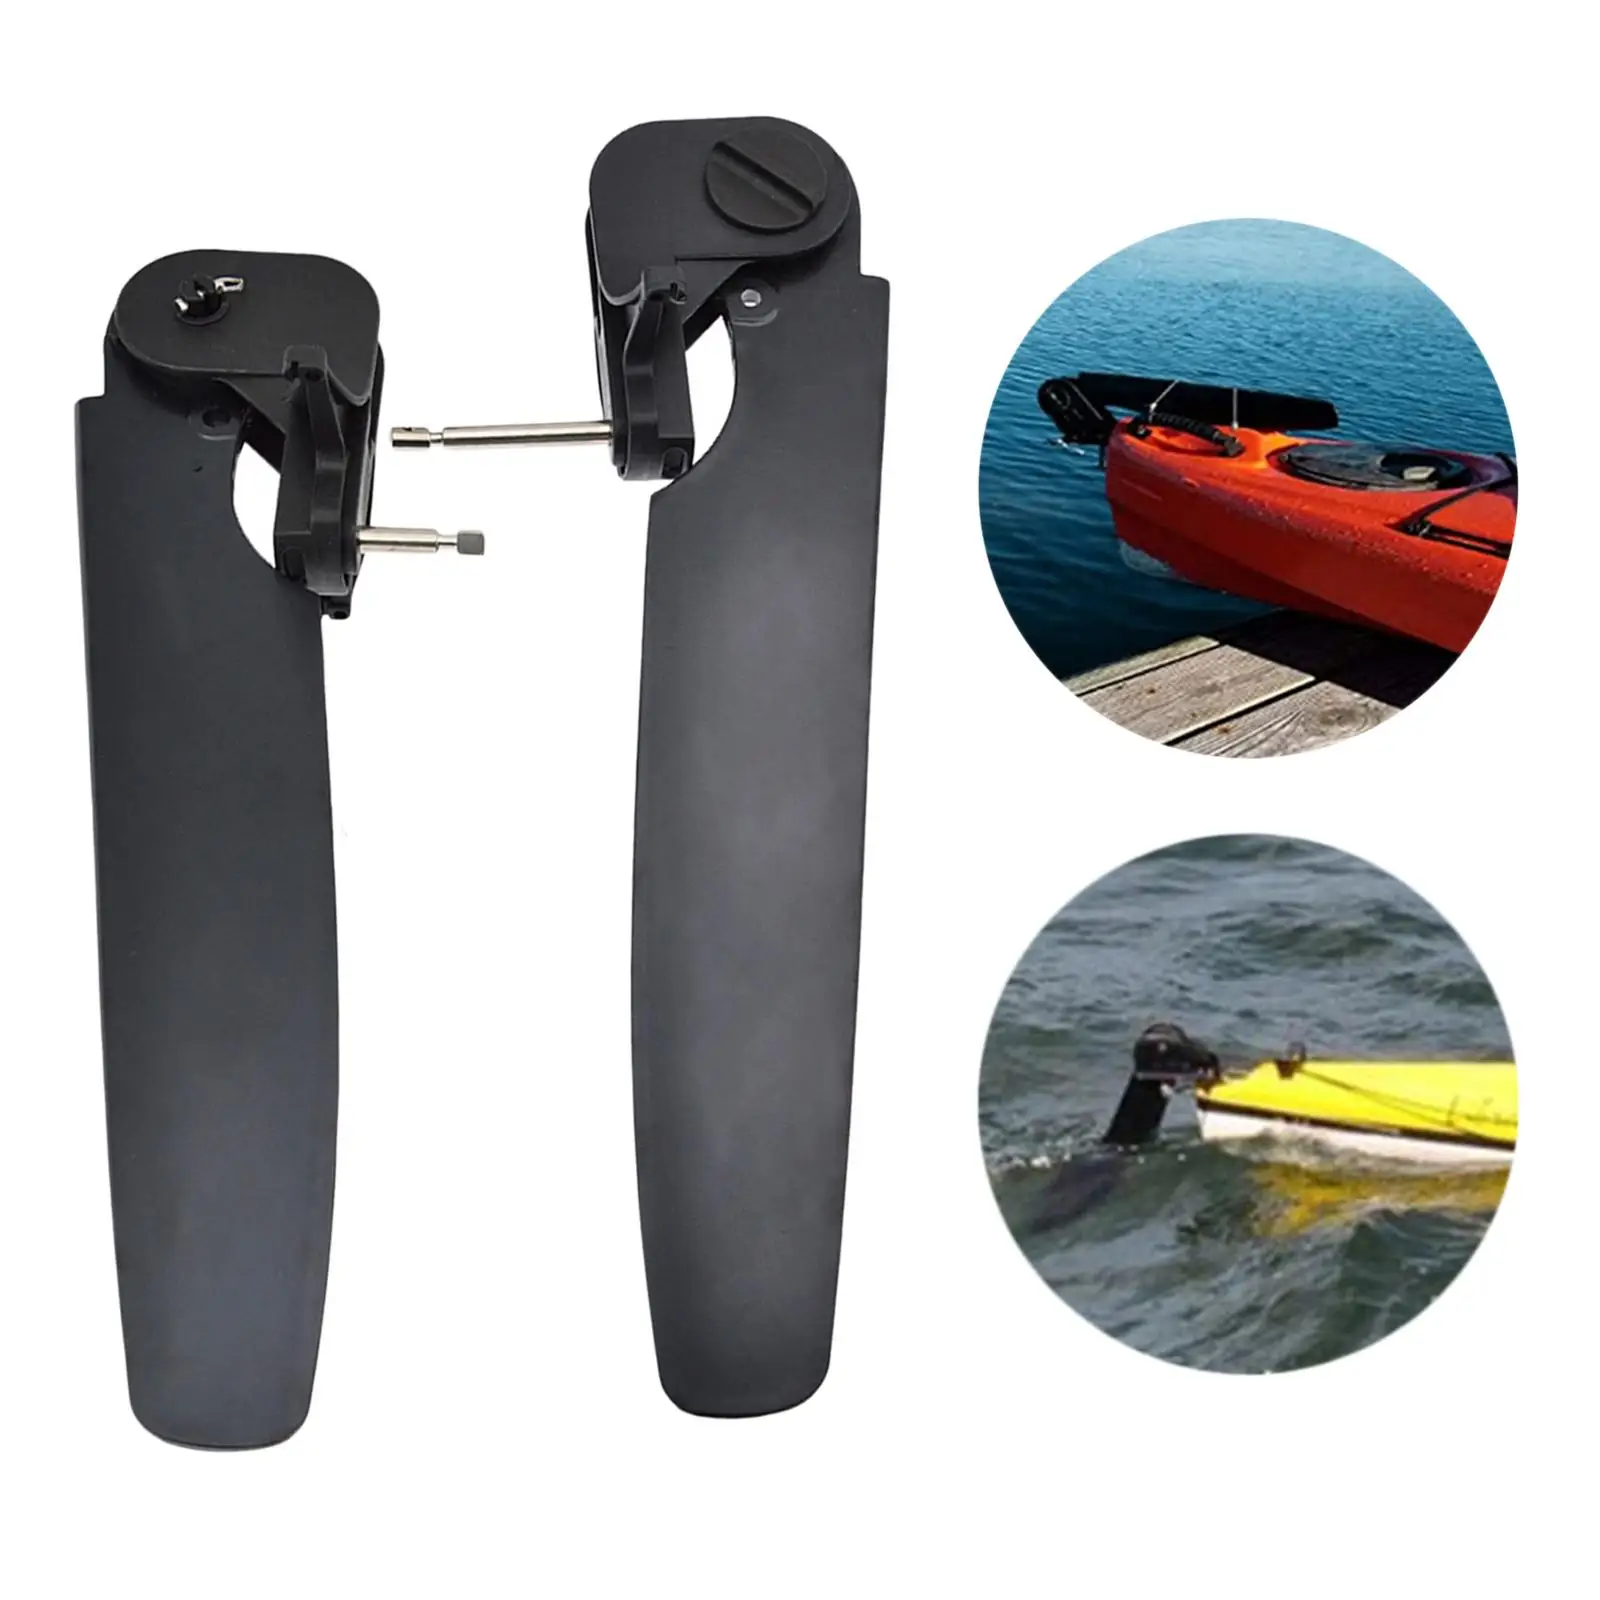 Kayak Boat Rudder Foot Control Switch Direction Accessroy Blade Black Steering System for Canoe Tail Watercraft Fishing Boat Sea